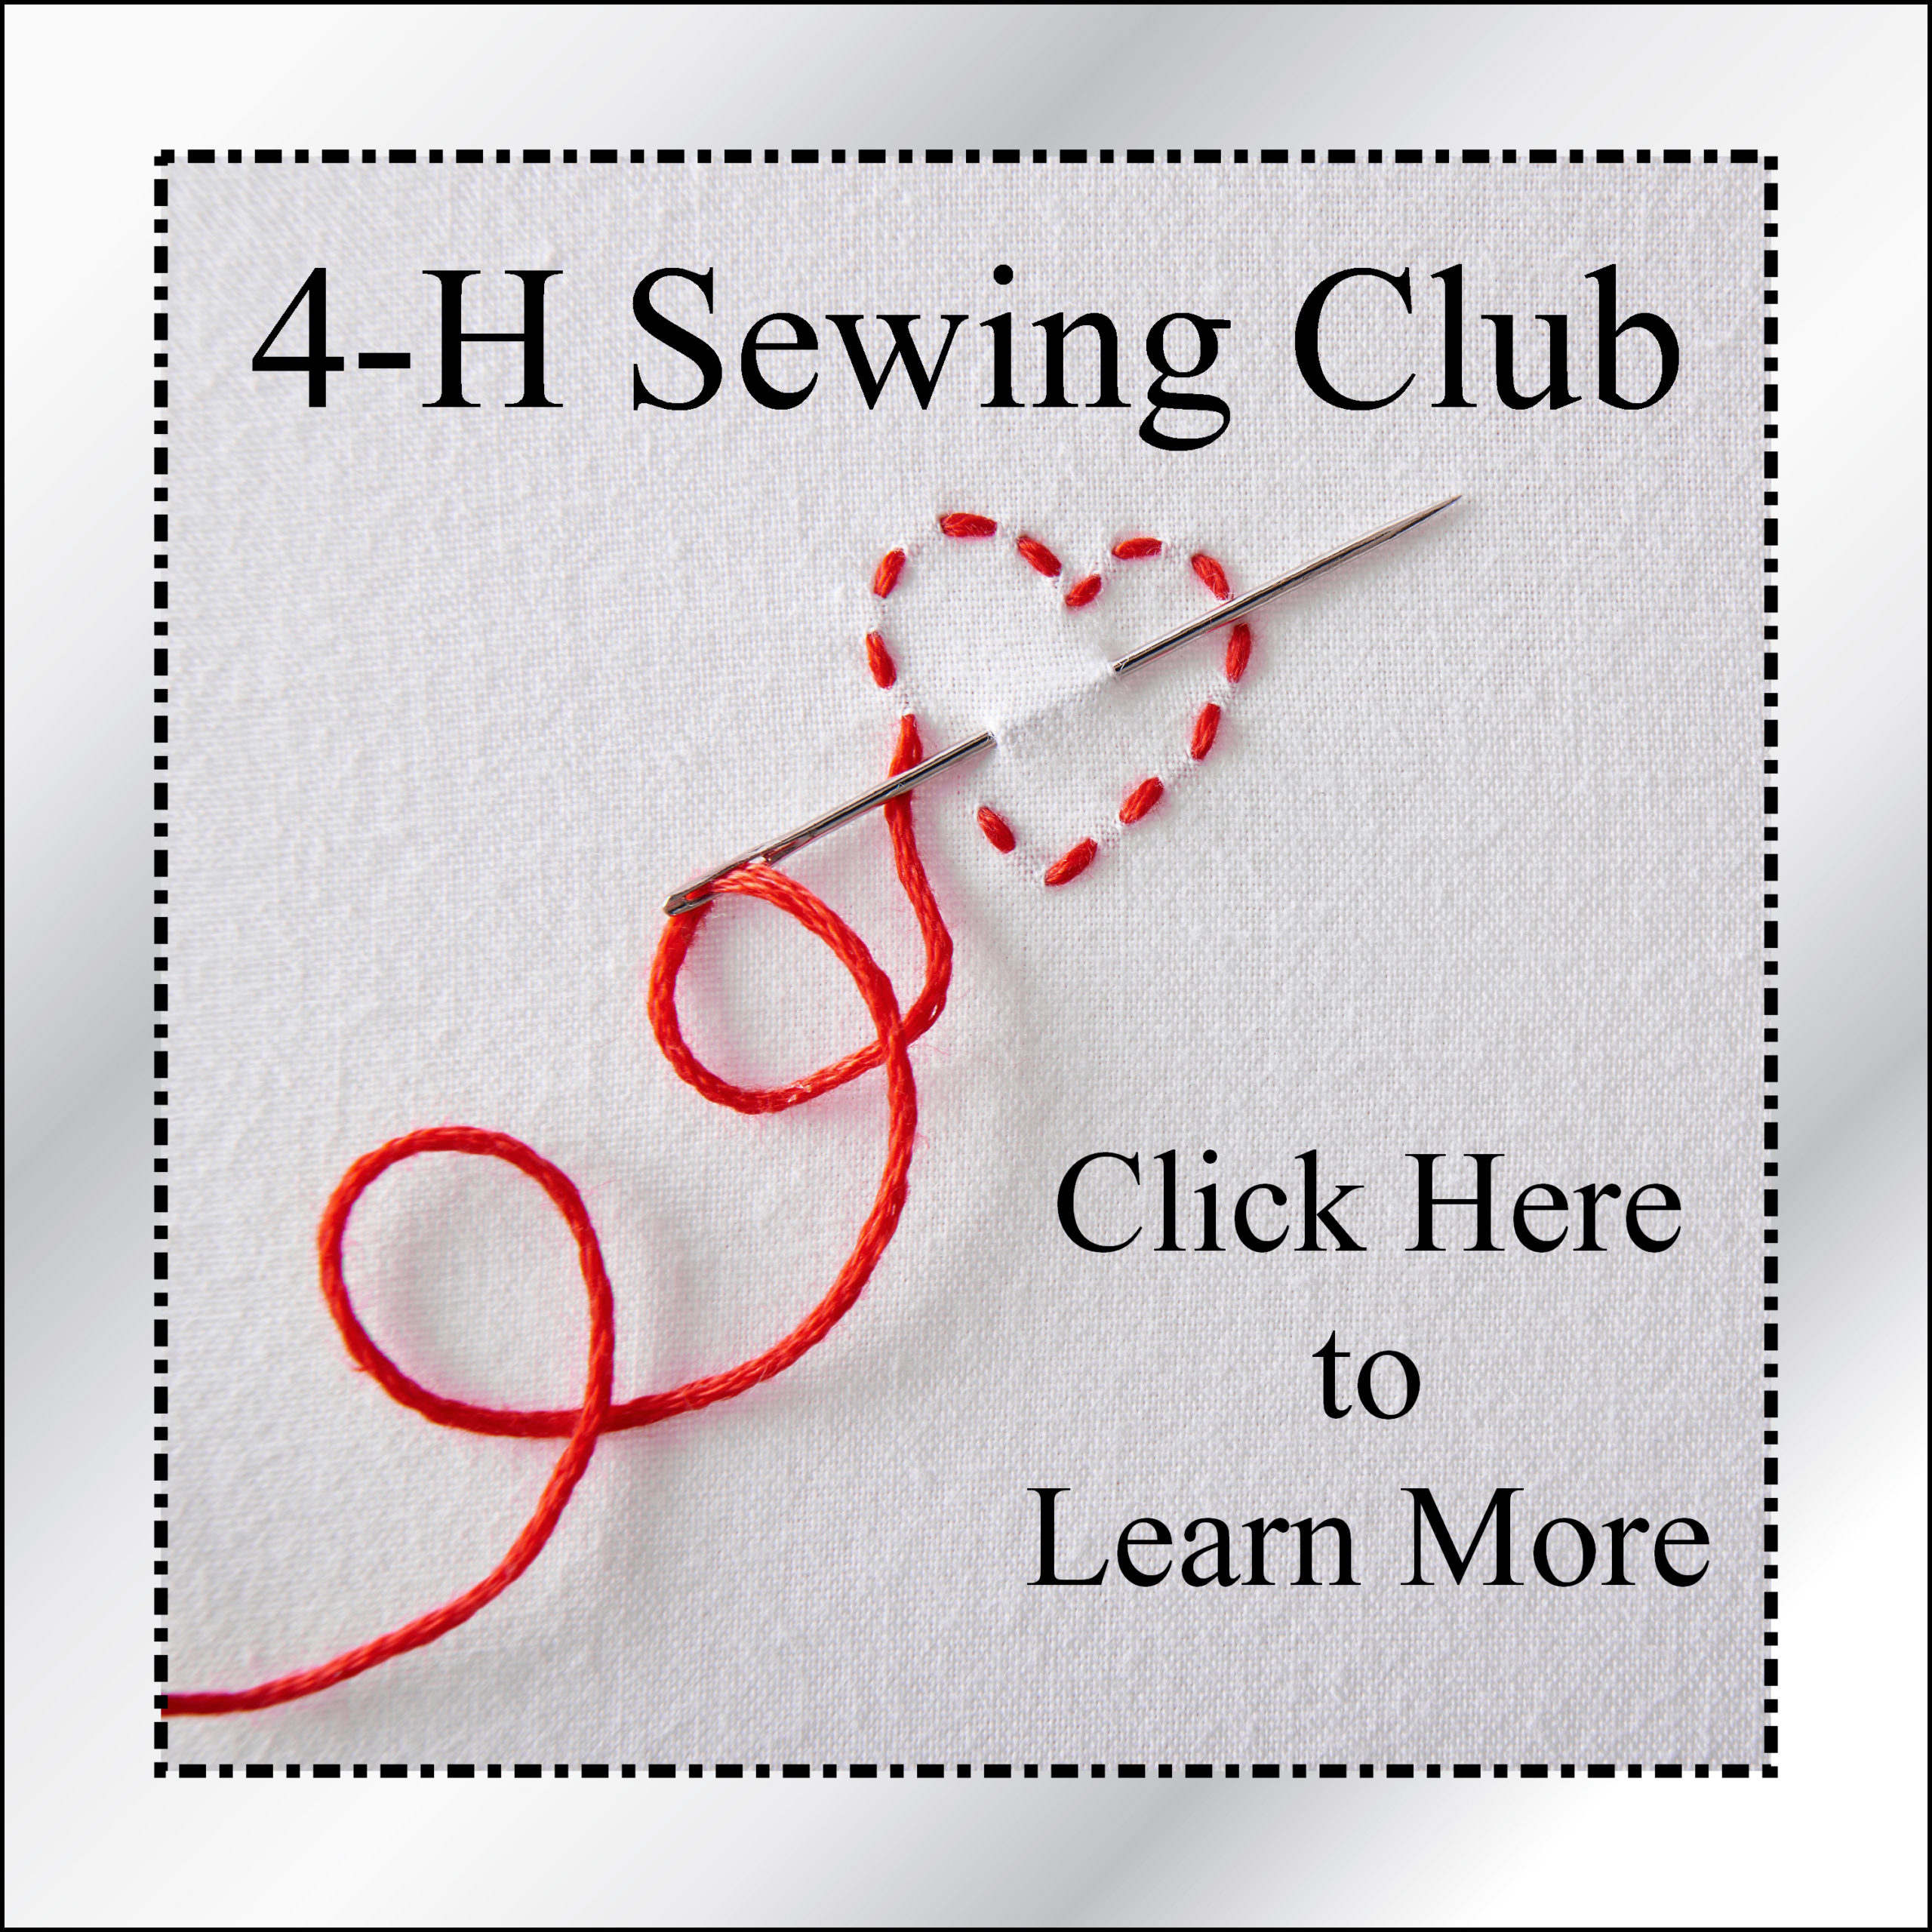 image with a sewing needle and an embroidered red hart on white fabric that says 4-H sewing club, click here to learn more 